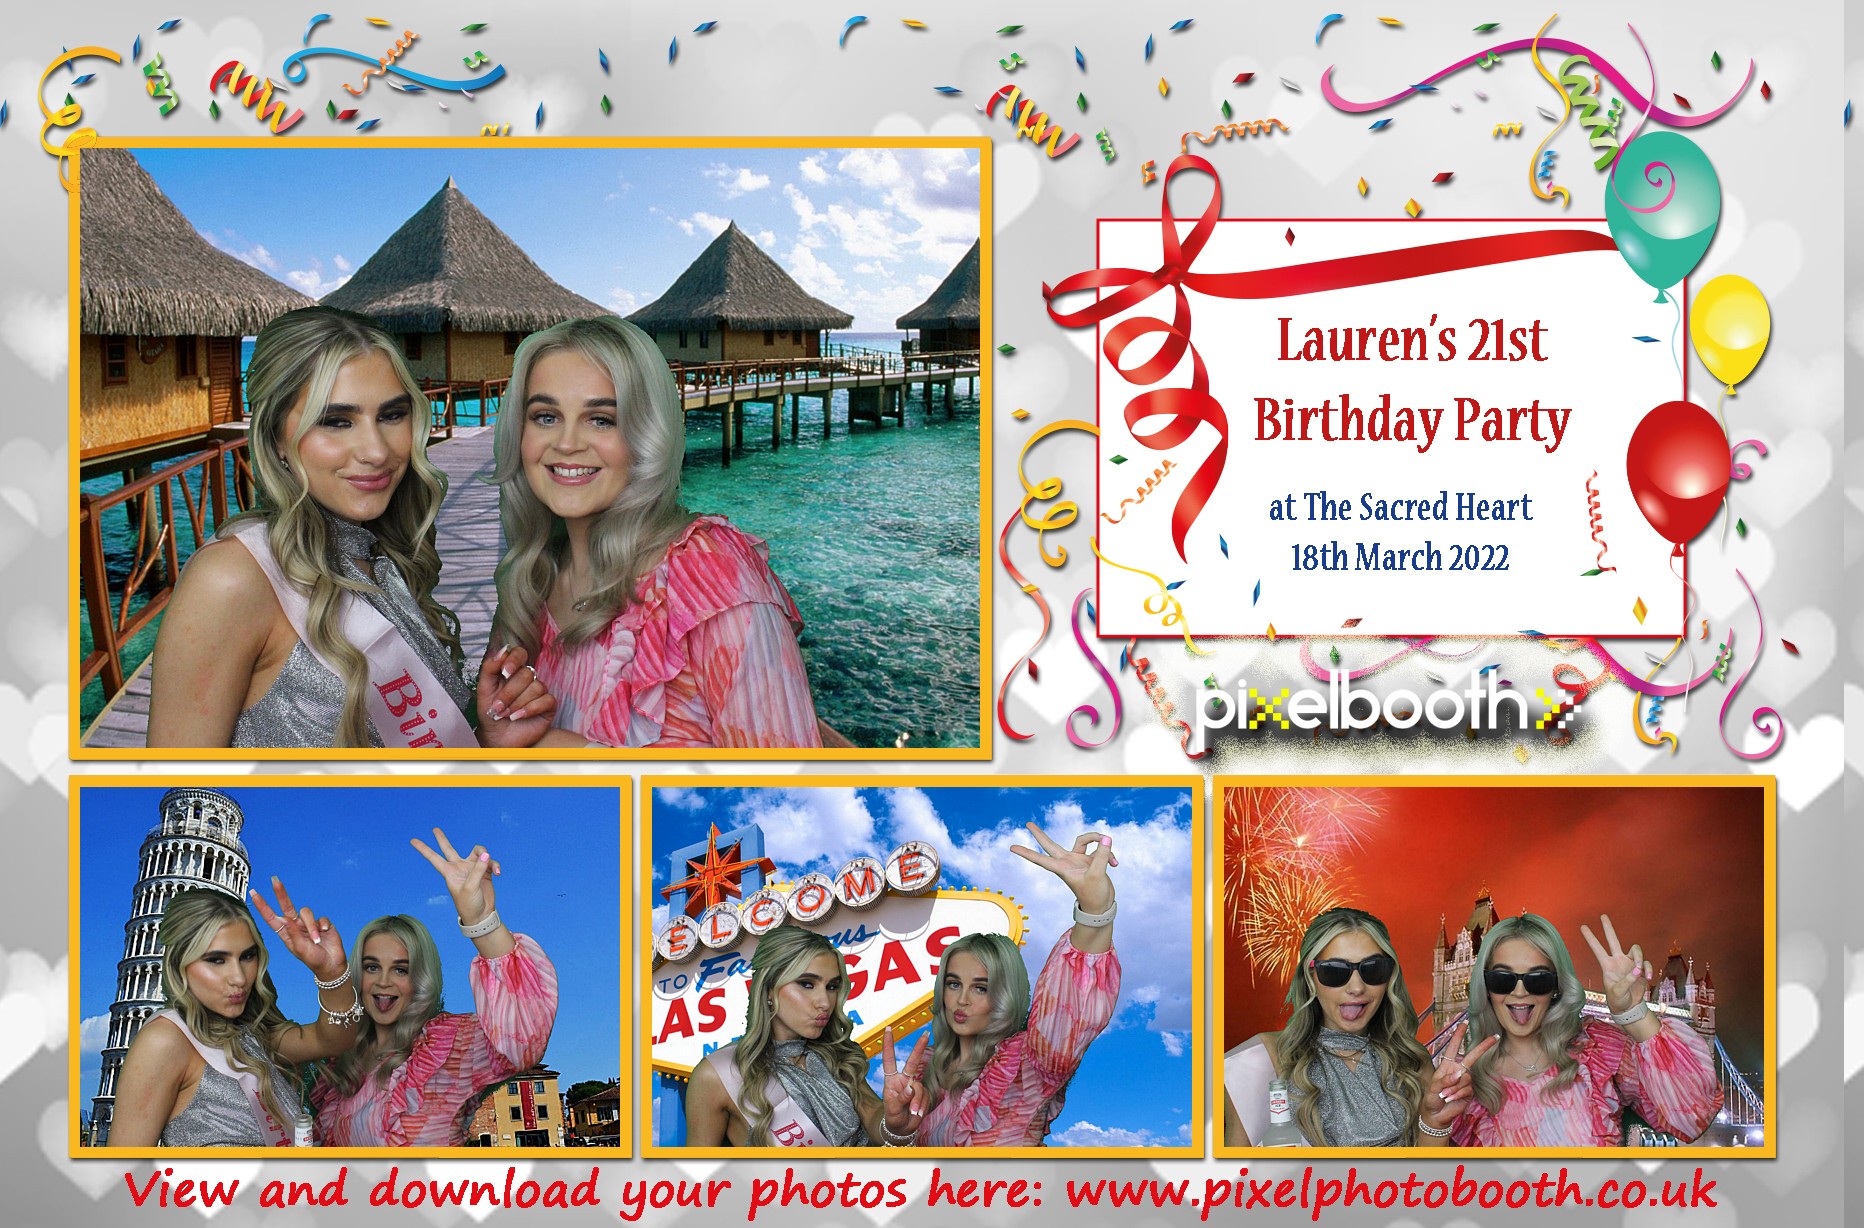 18th March 2022: Lauren's 21st Birthday Party at The Sacred Heart